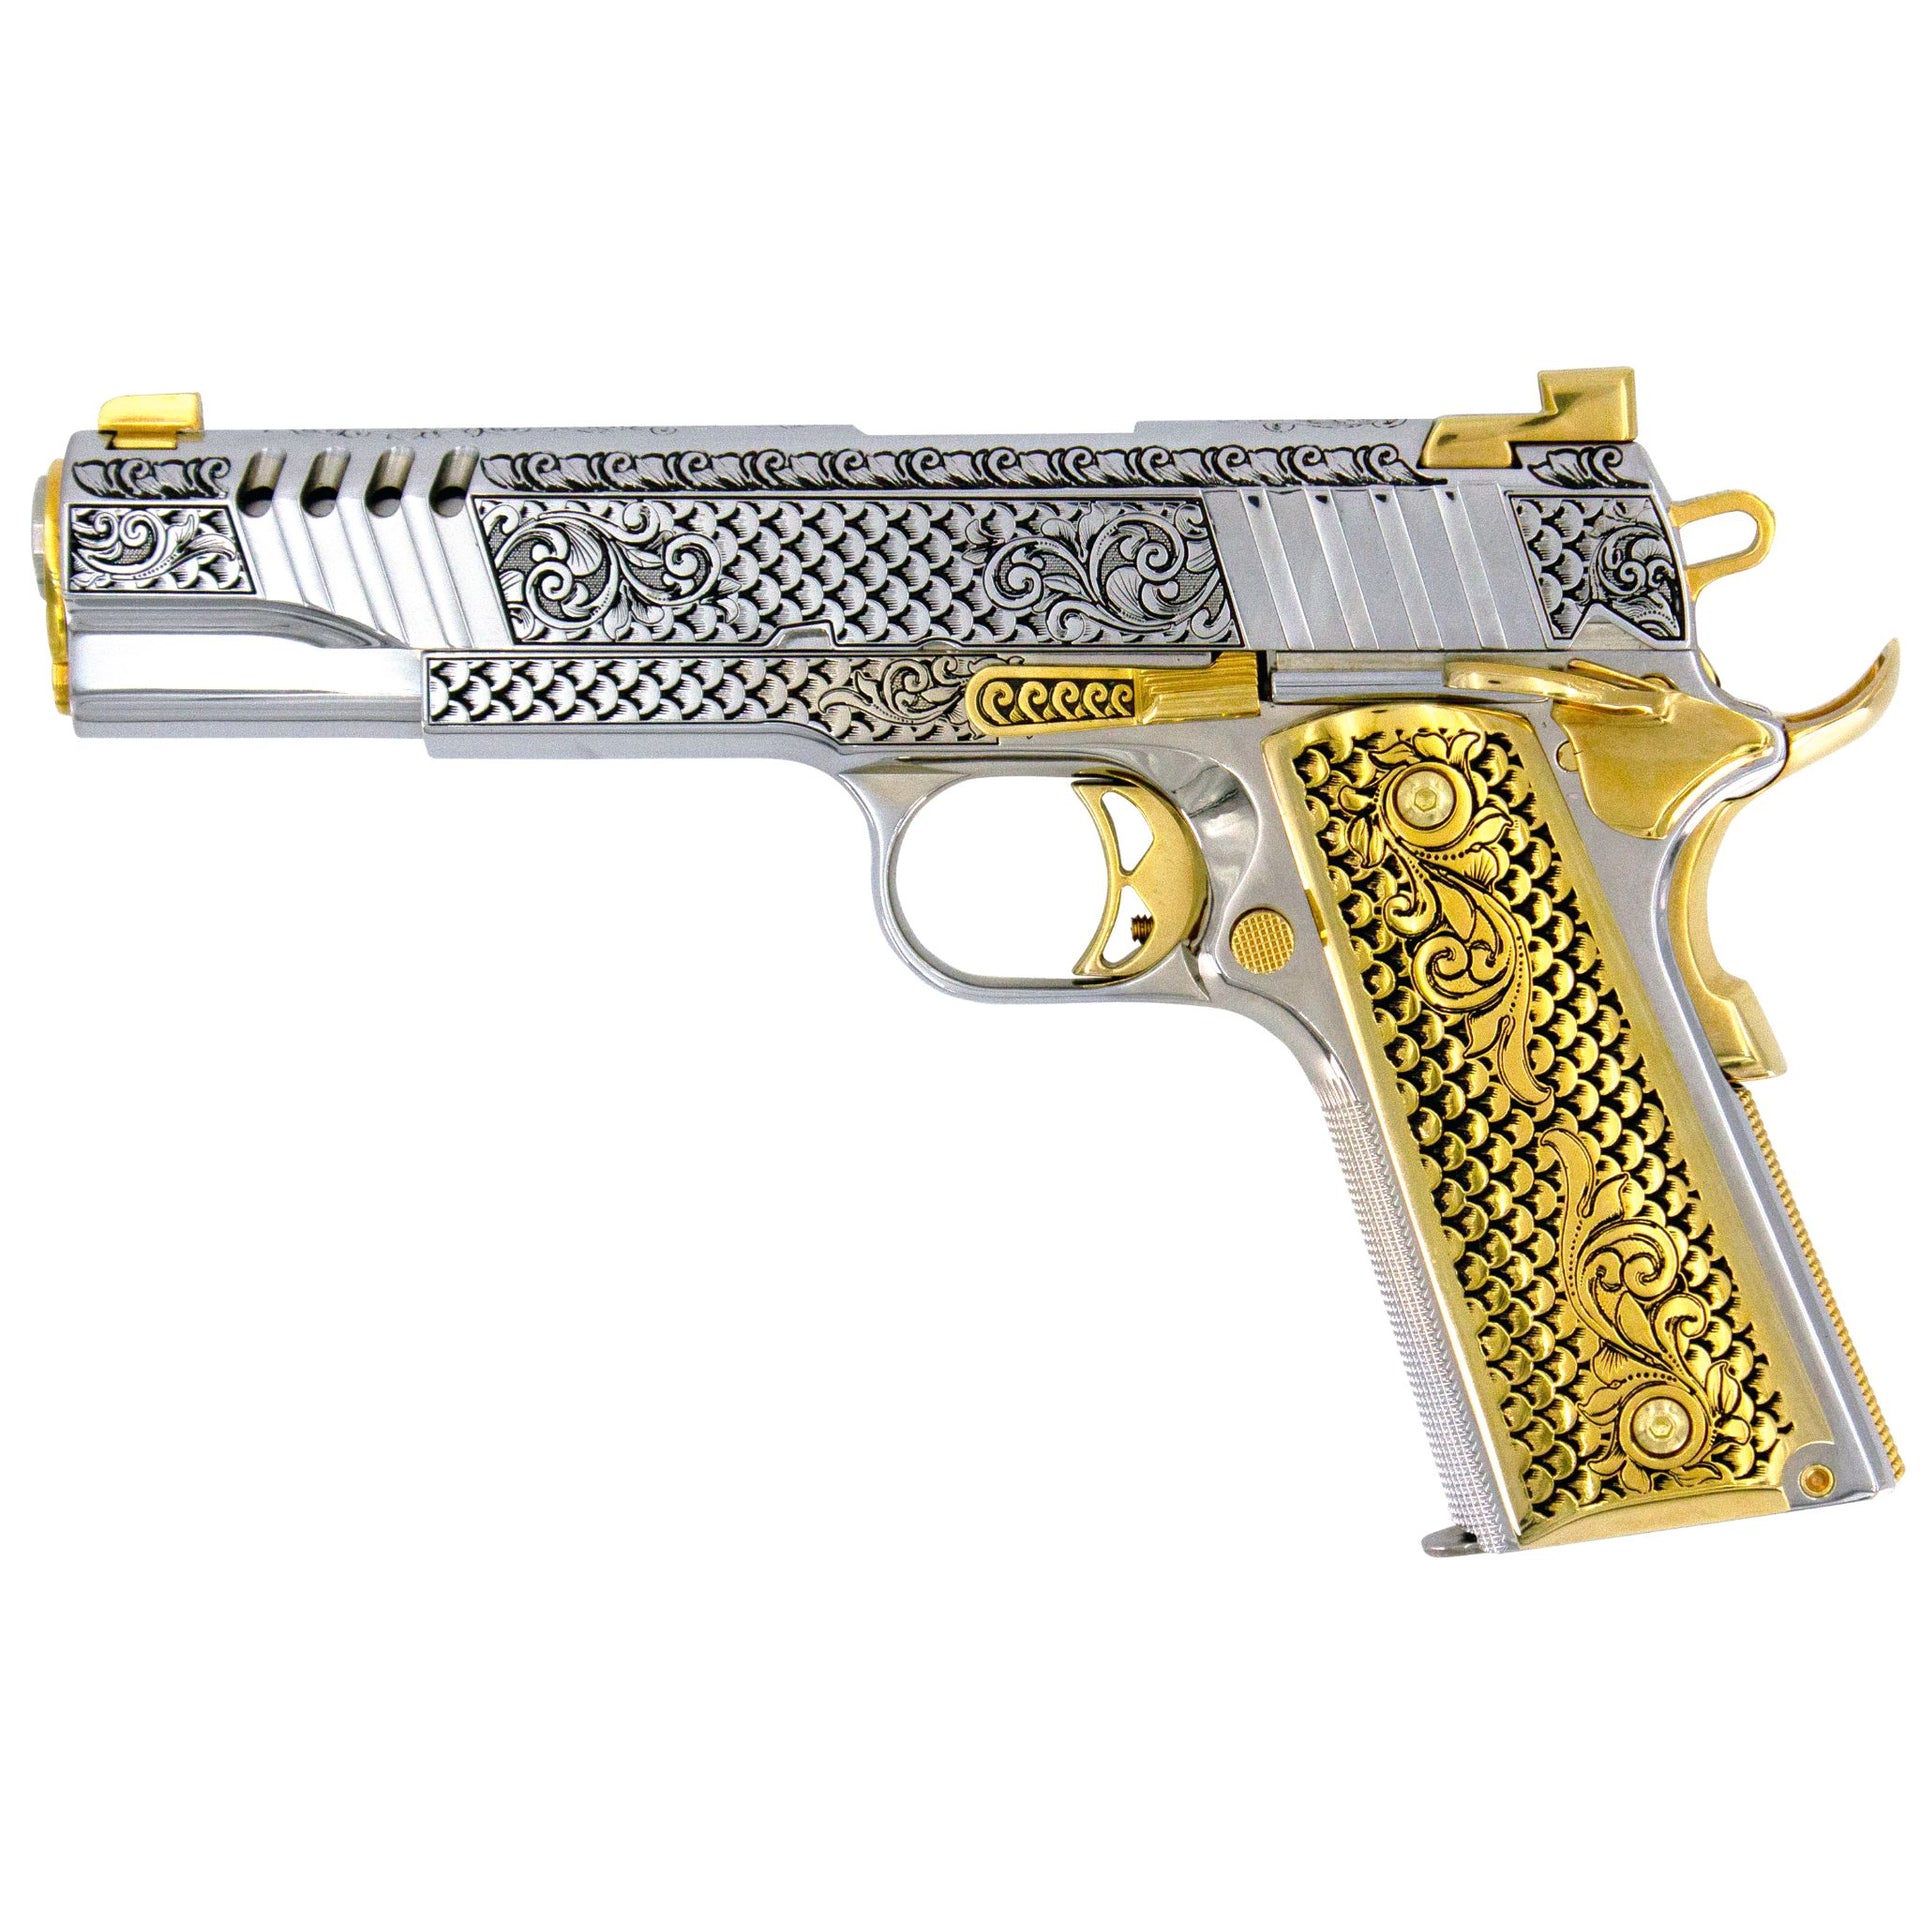 Auto Ordnance 1911, 45 ACP, Engraved In High Polish White Chrome, with 24 karat Gold Plated Accents, SKU: 7010467643494, Gold Gun, Gold Firearm,